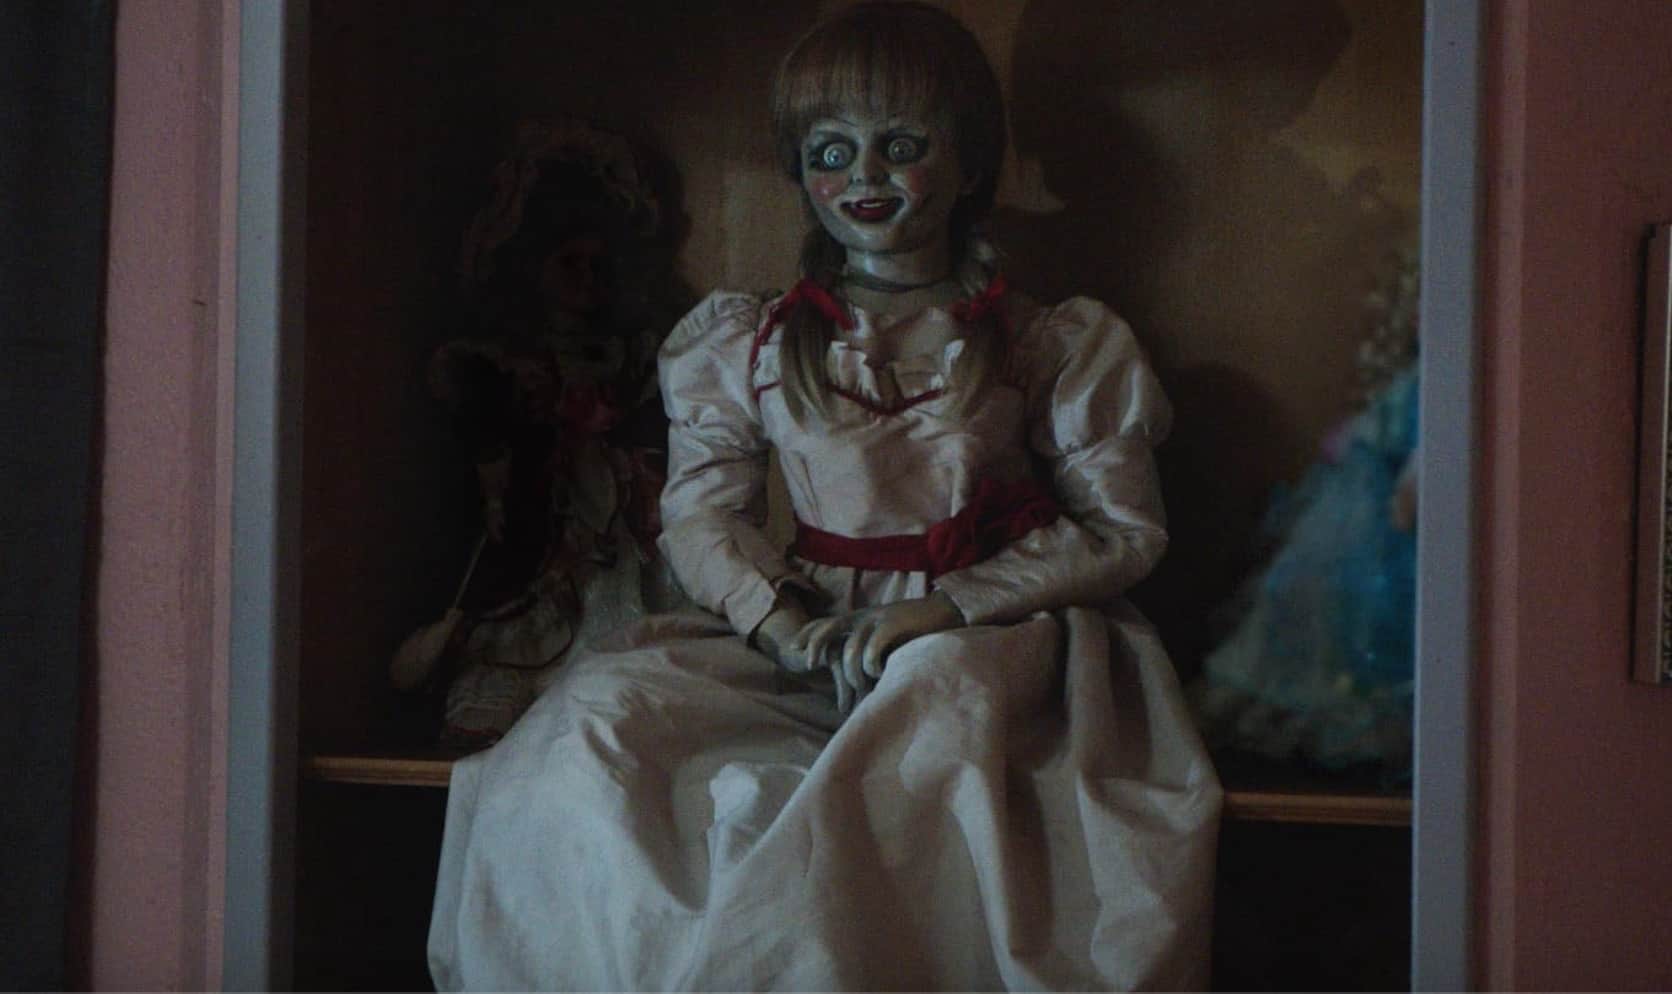 A creepy doll in a dress sits in the closet in this image from Warner Bros. Pictures.